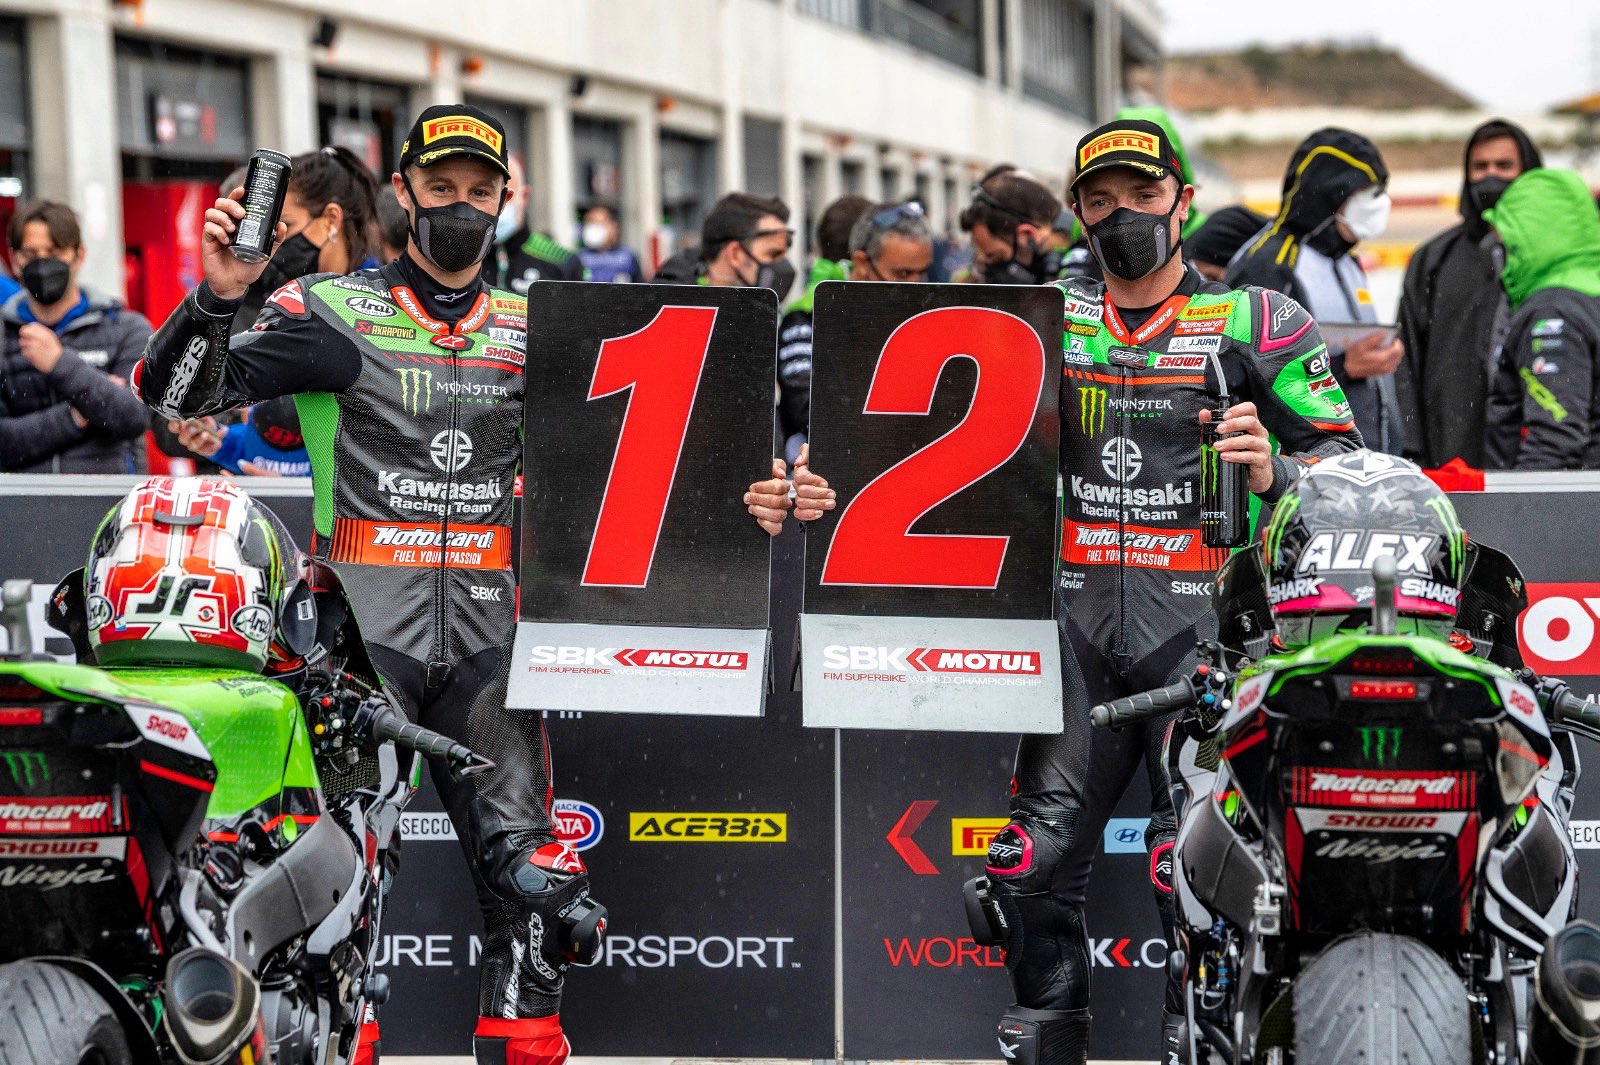 Superbike – Championship: Rea and Kawasaki show their intentions